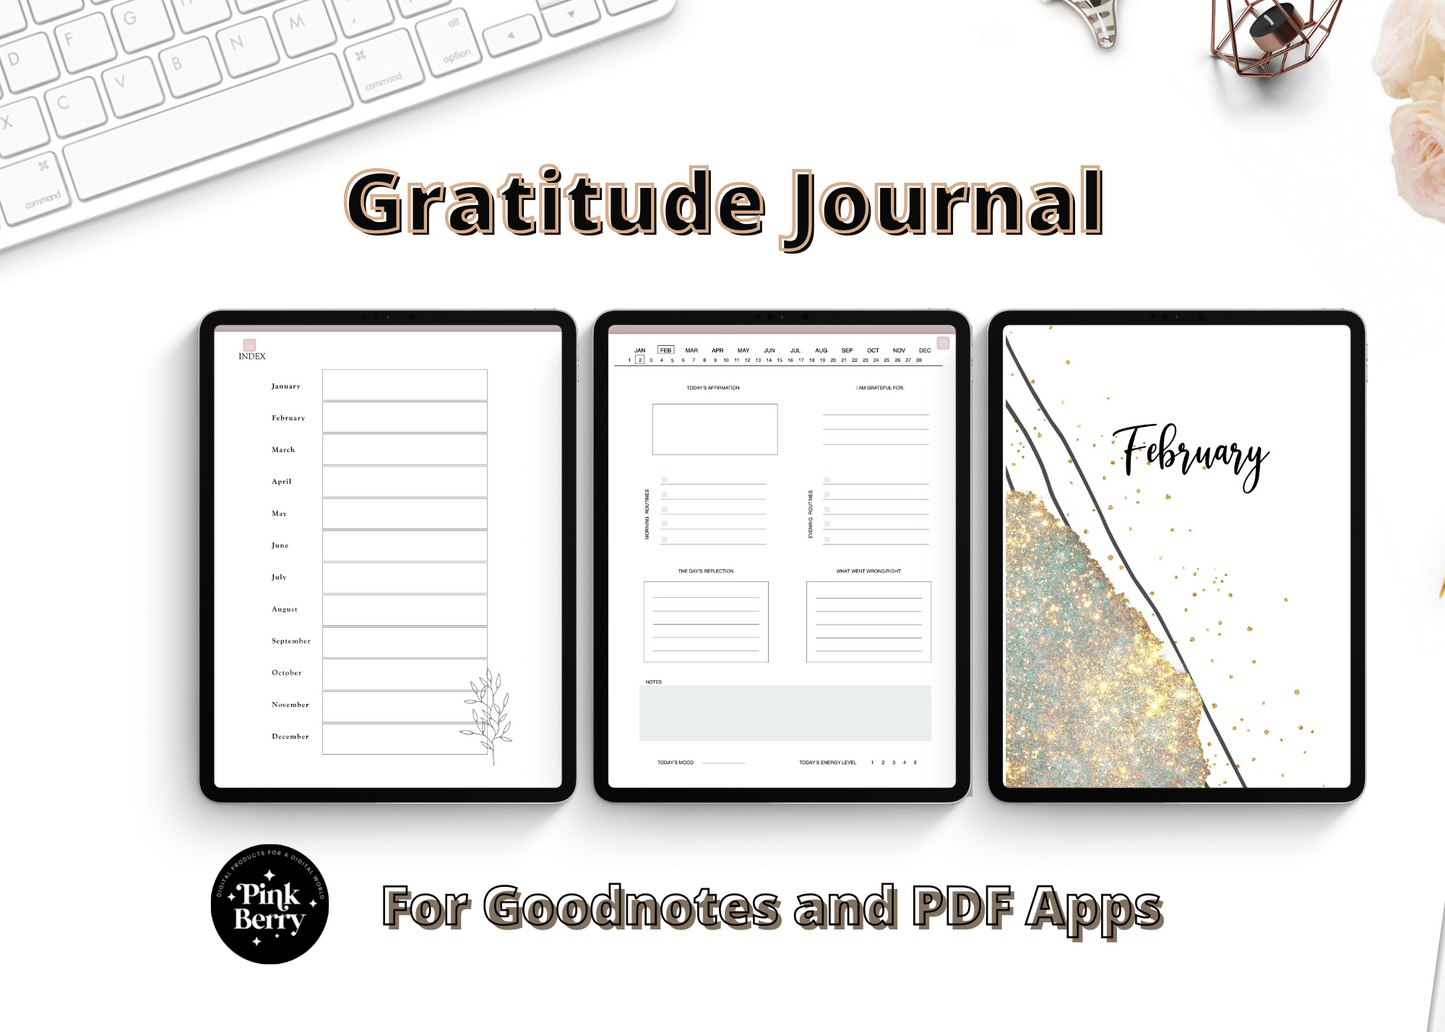 PLR Digital Daily Journal | GoodNotes Journal | iPad Journals | Digital Diary For Commercial Use